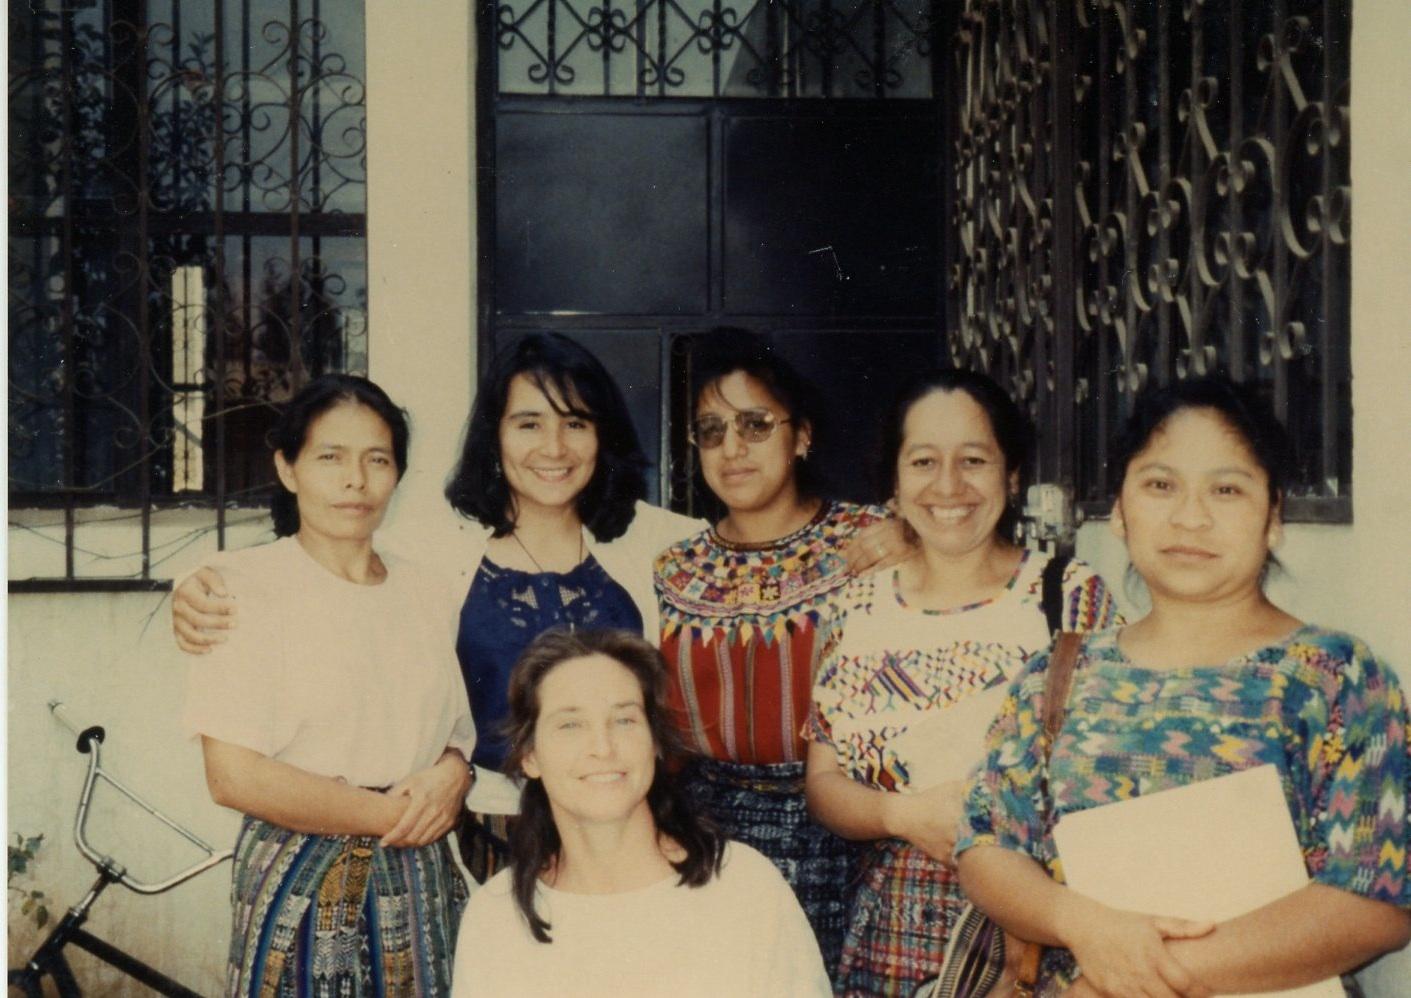 With colleagues from ASECSA team involved in training of Community Health Workers on sexual and reproductive health, Guatemala, 1998.